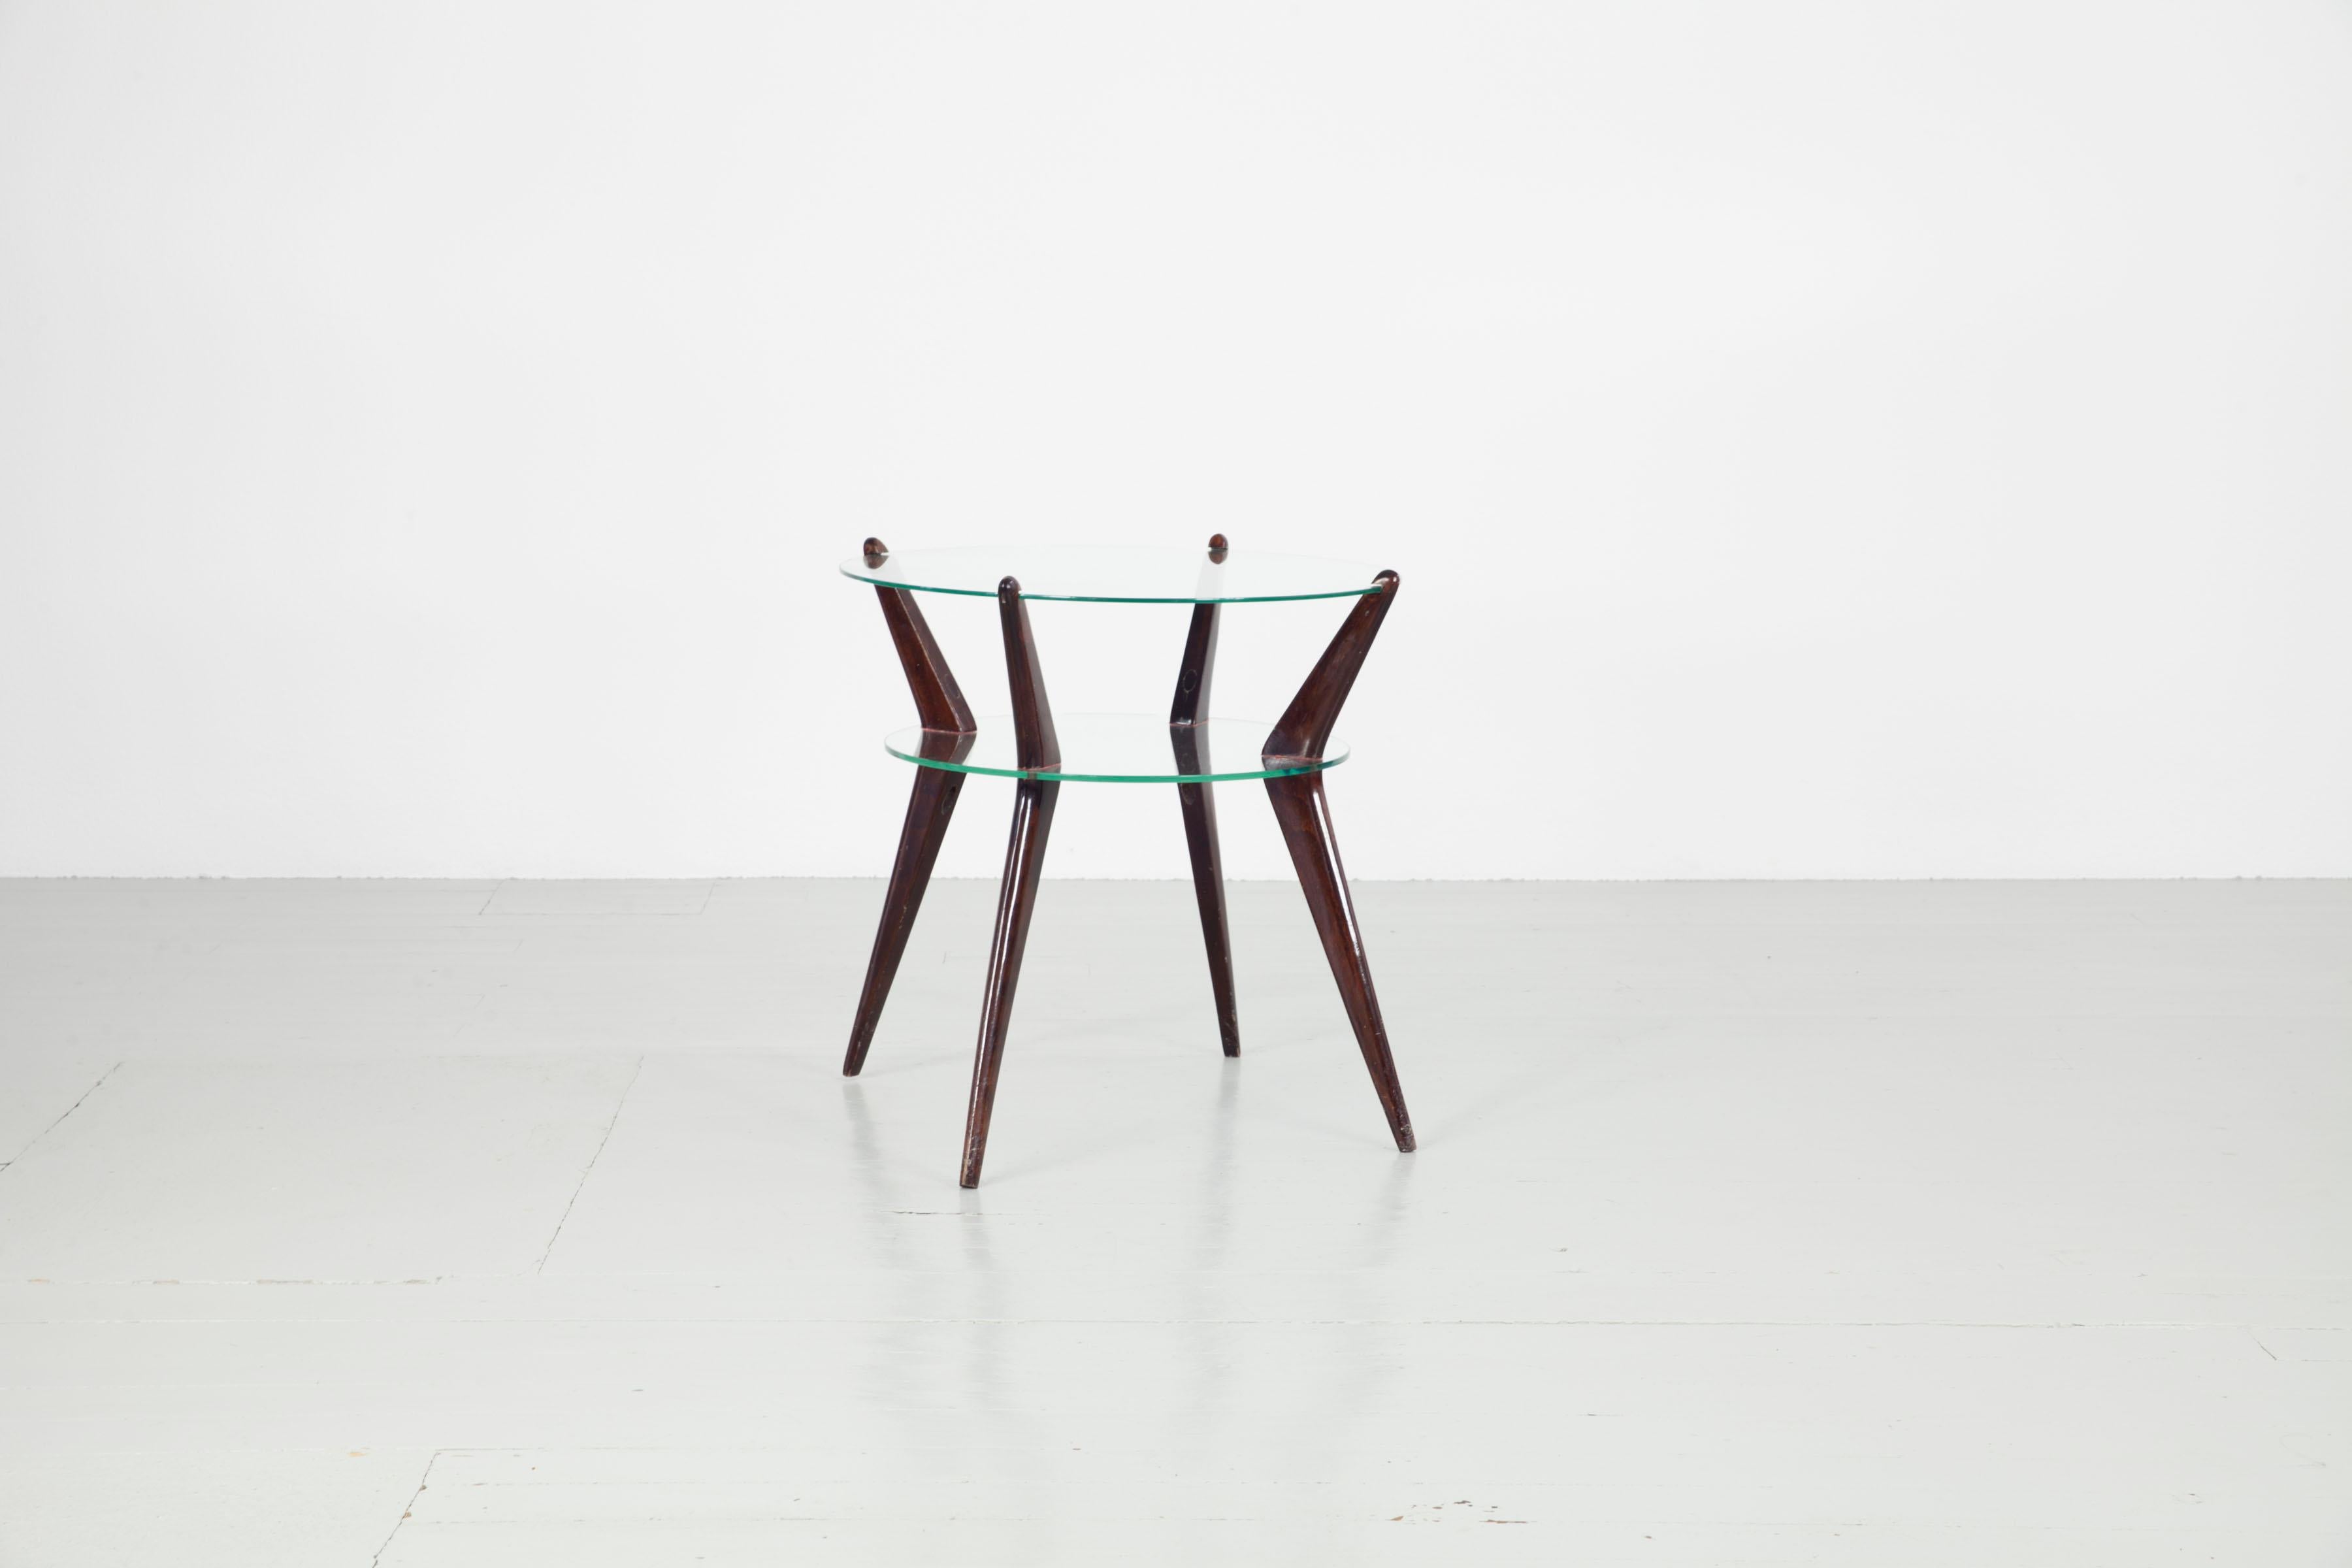 Mid-20th Century Italian Coffee Table with Legs of Dark Stained Wood and Glass Top, 1950s